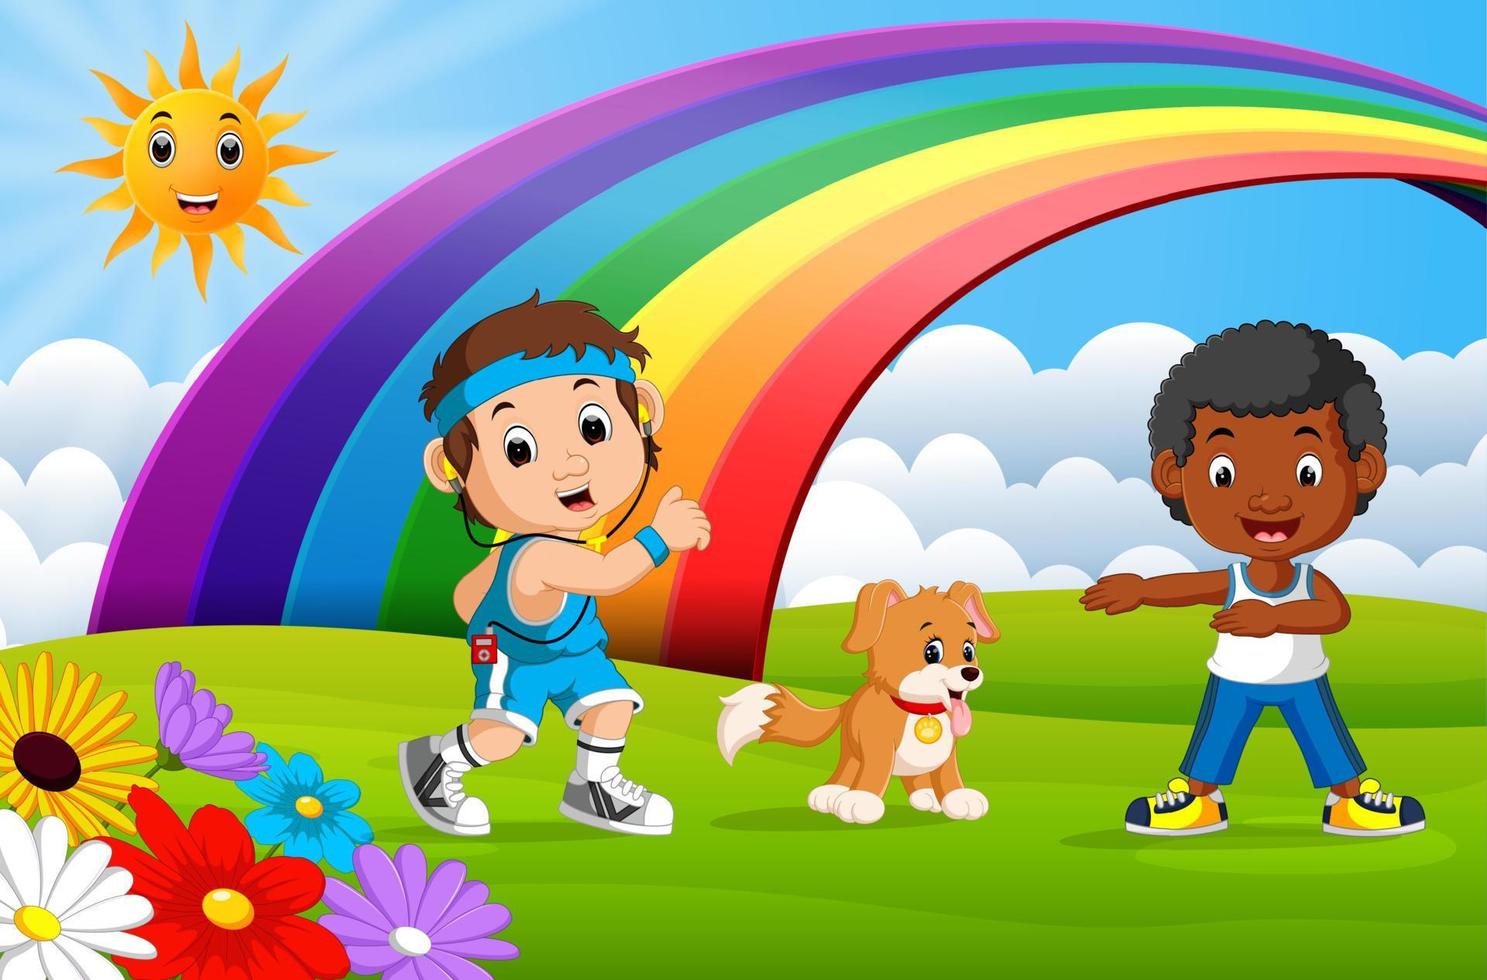 Children sport and dog in the park on rainbow day vector